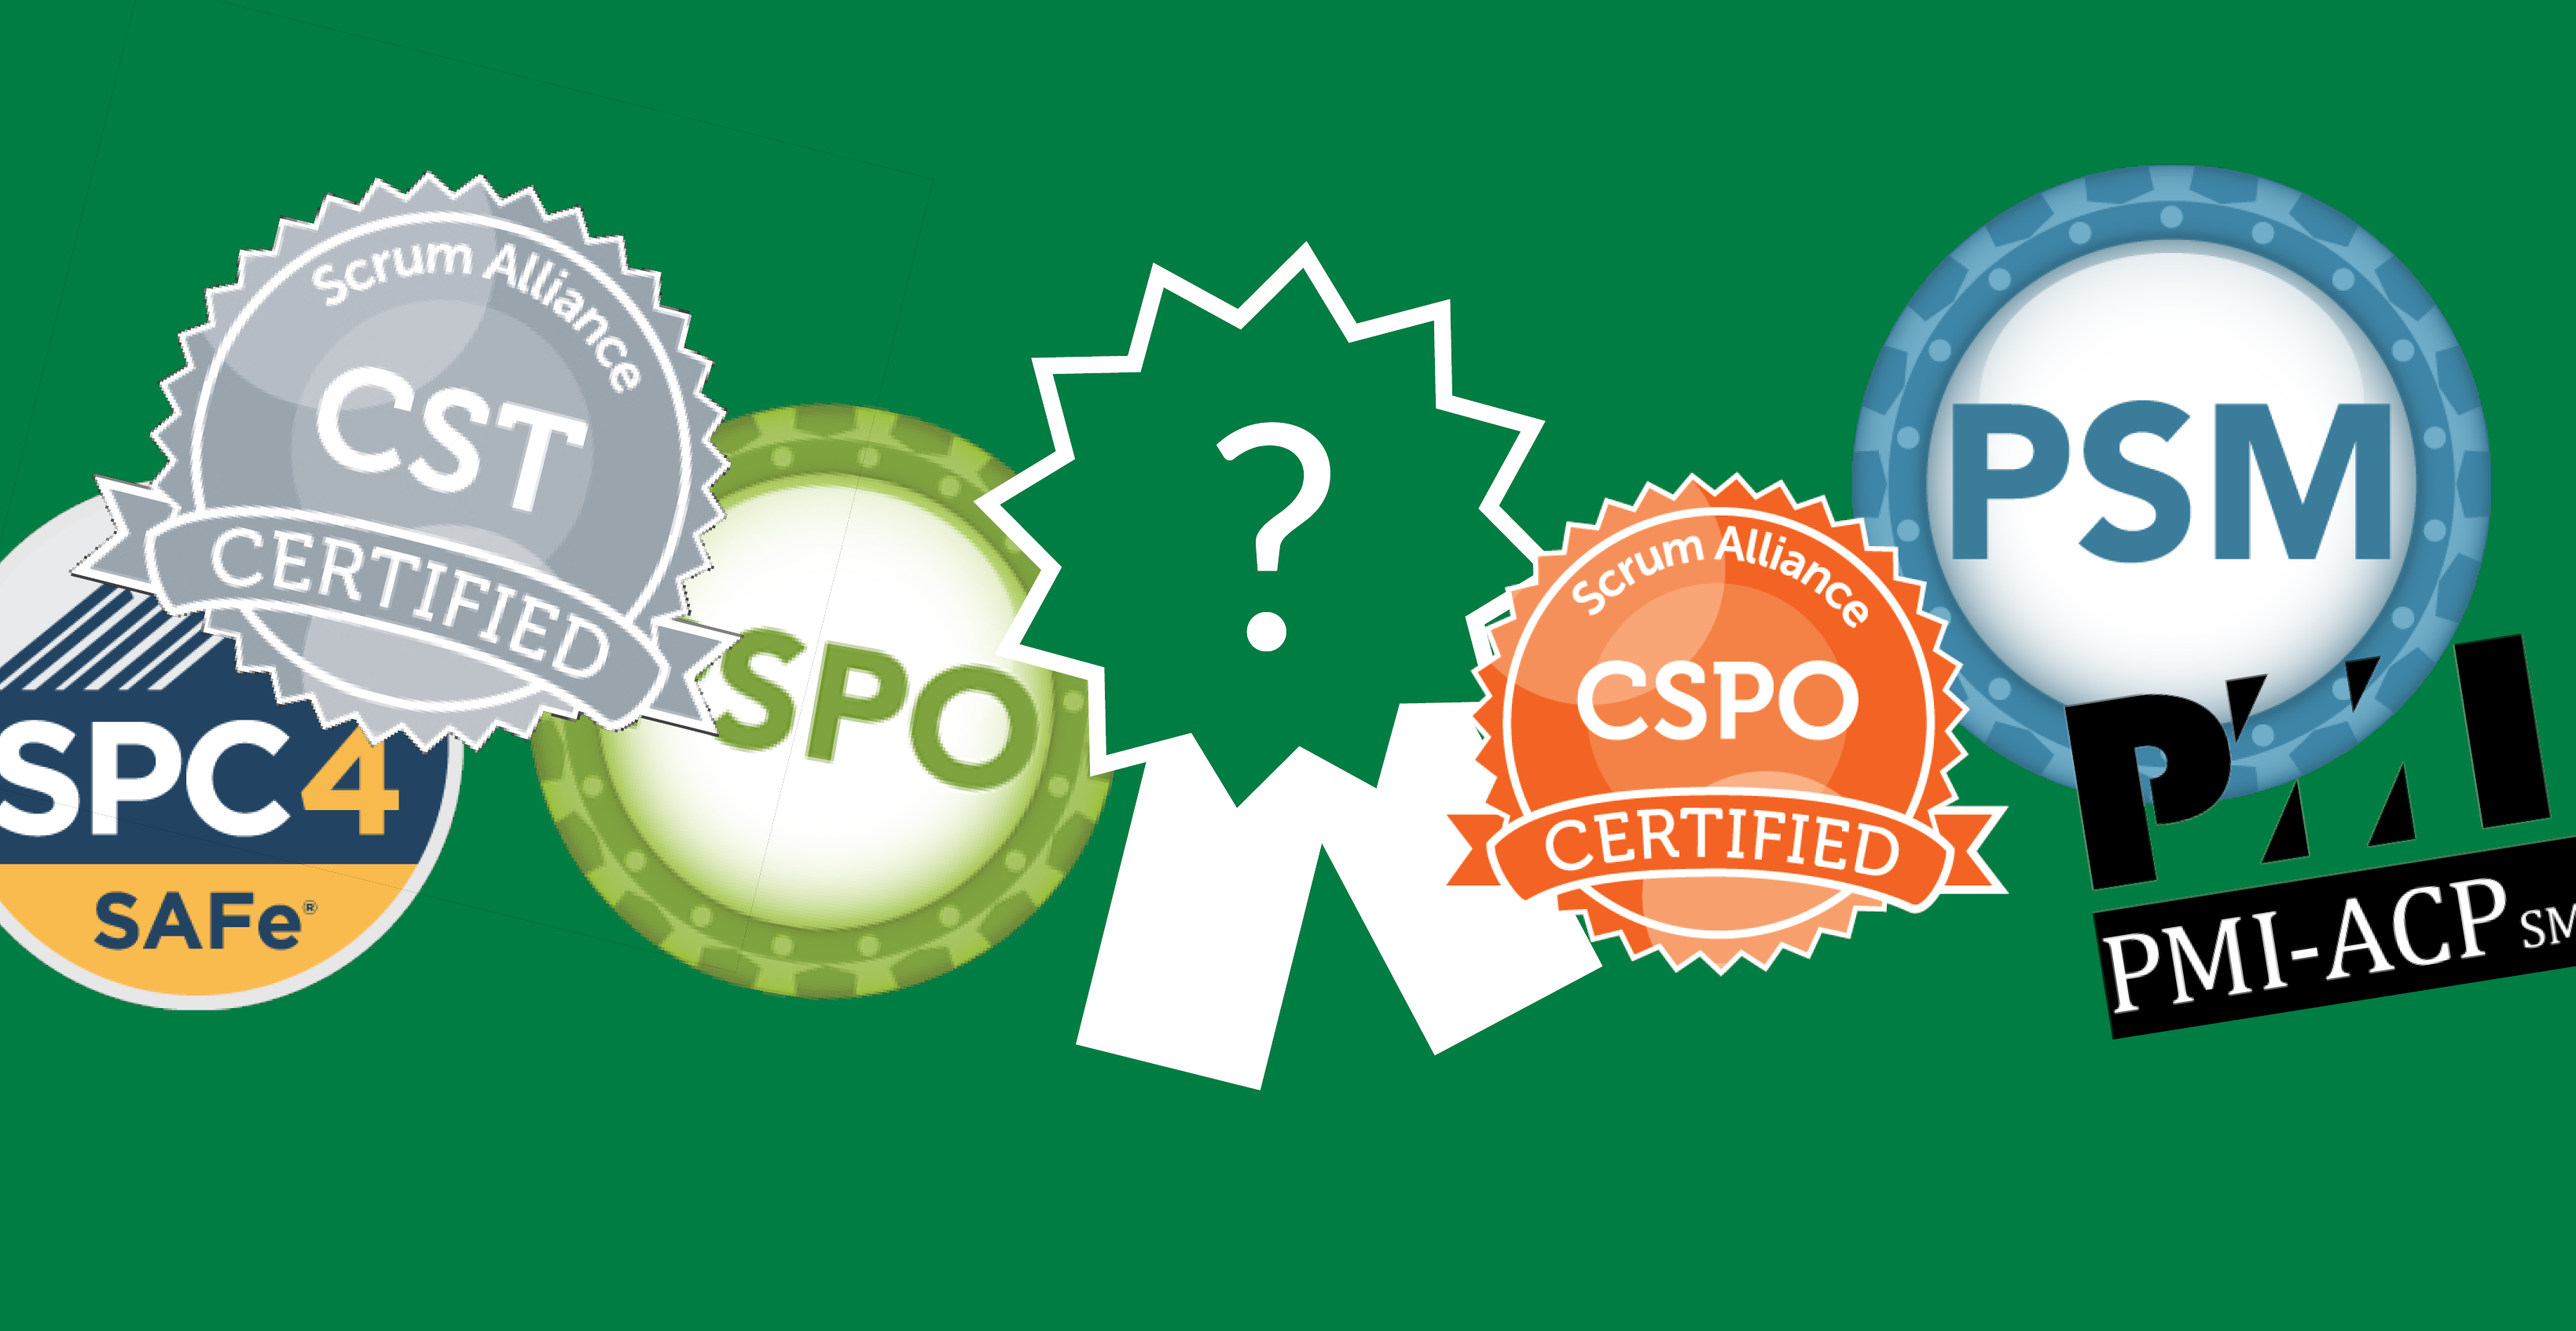 Agile and Scrum Certifications - Do You Need Them?